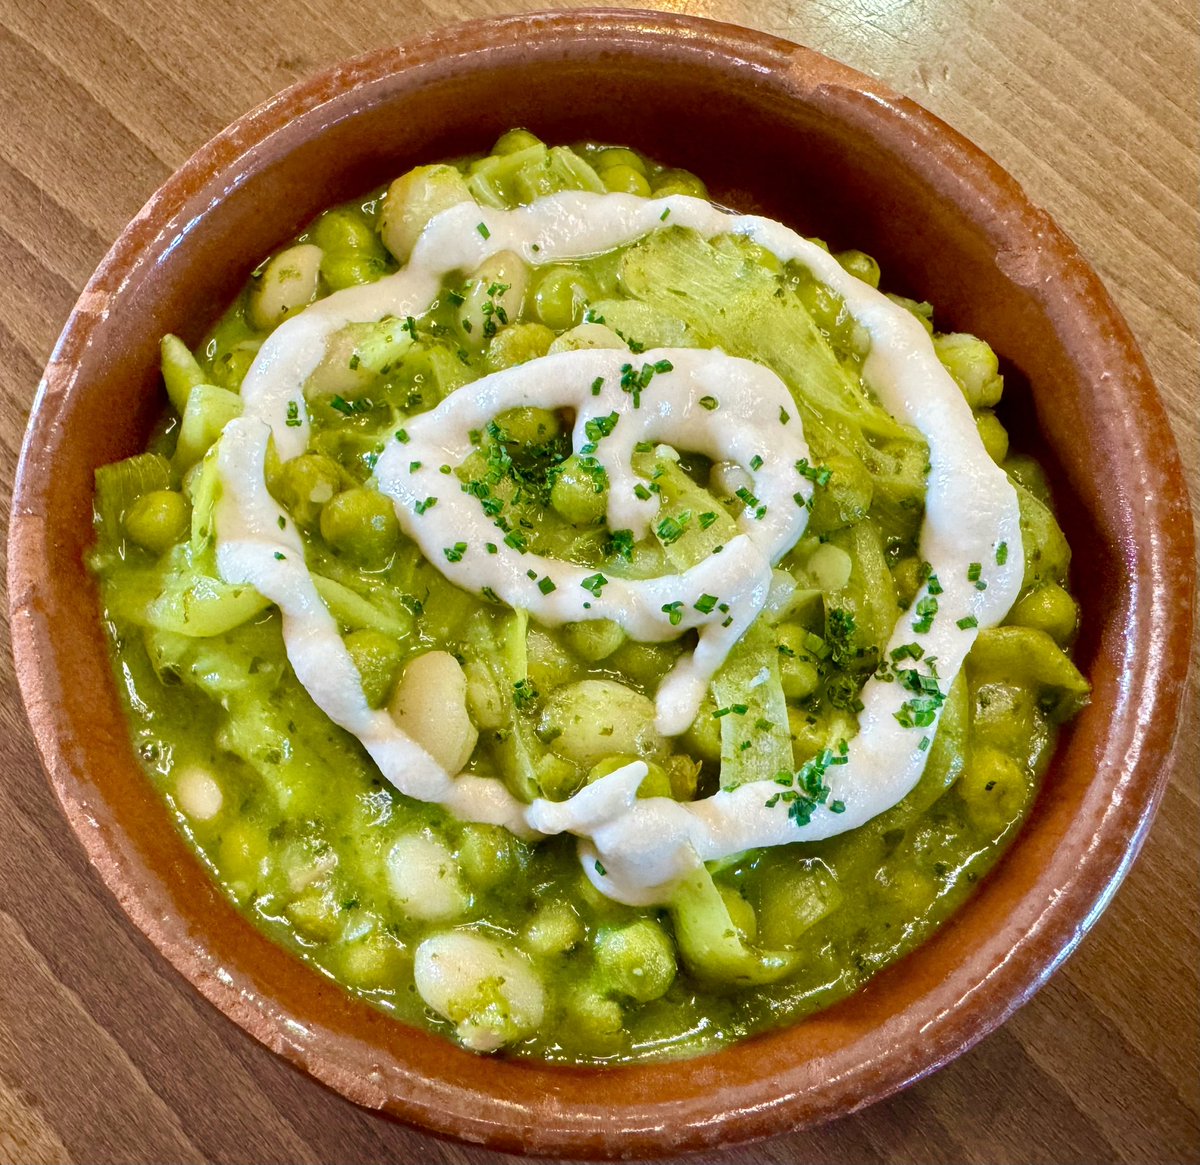 New dish on our new summer menu. Creamy Navarran alubias beans with peas, spinach baby and basil with vegan cream cheese topped with a roasted Catalan almond emulsion. It’s out of this world and vegan